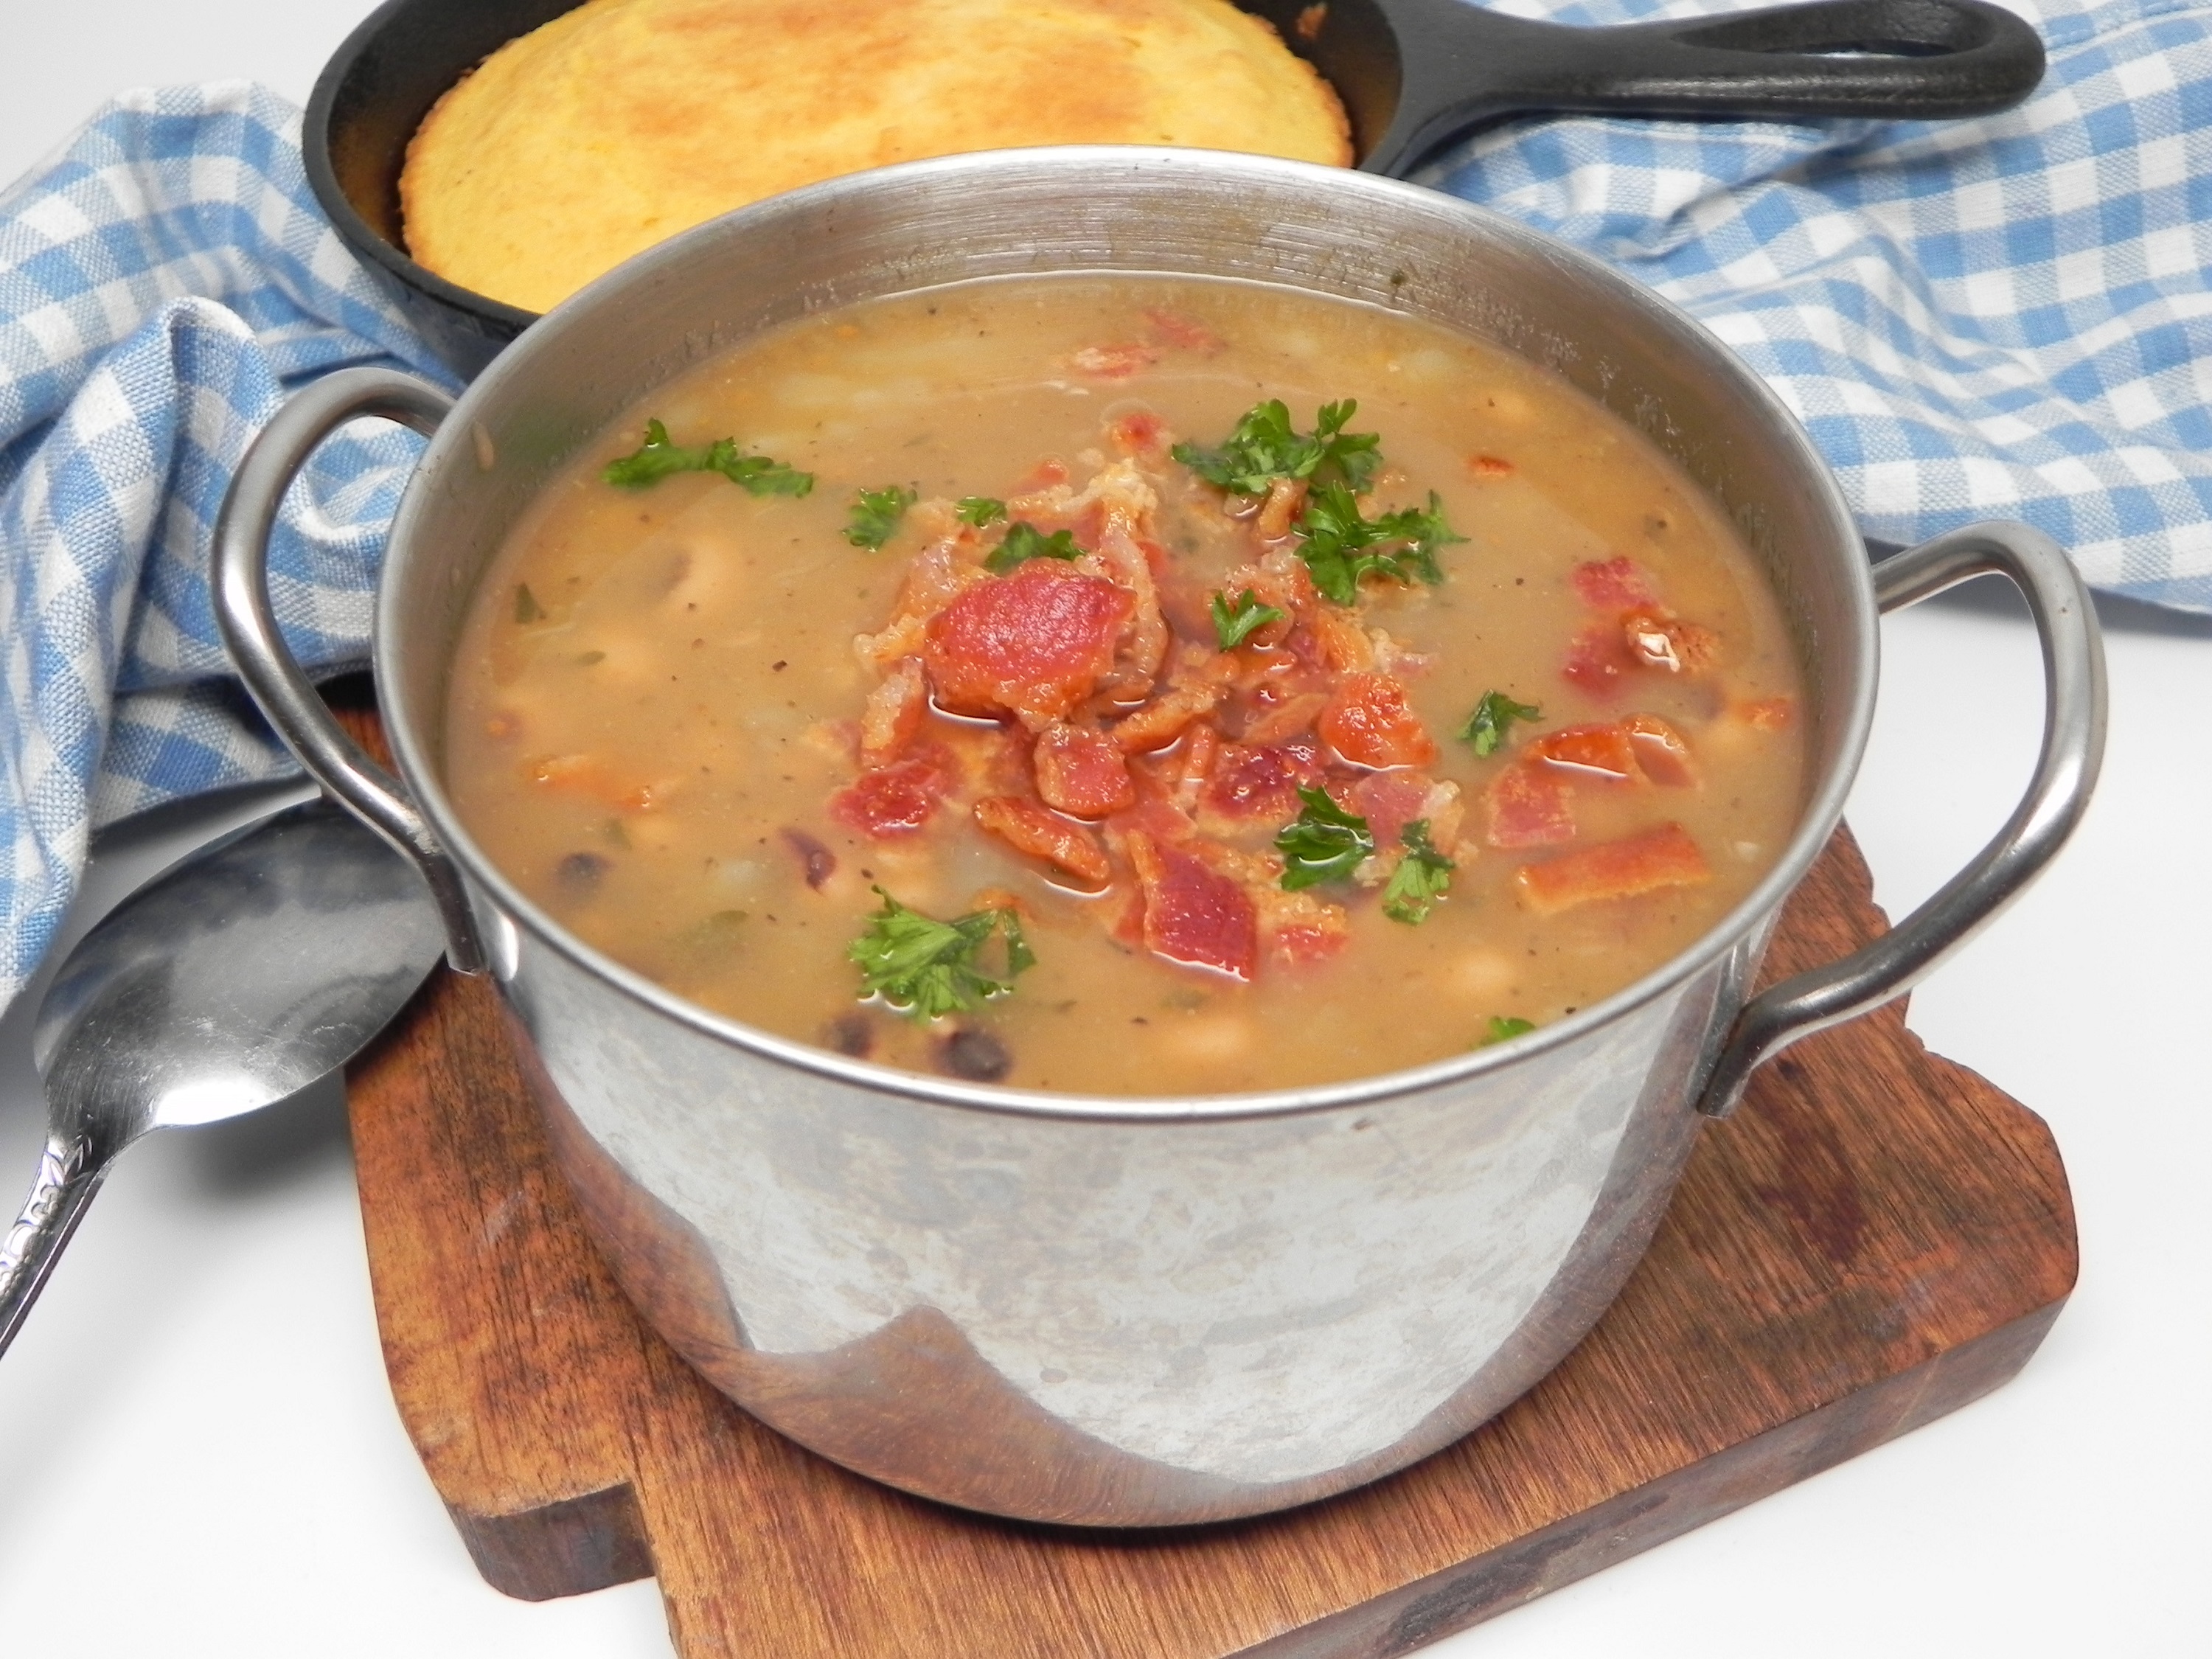 Black-Eyed Pea and Bacon Soup